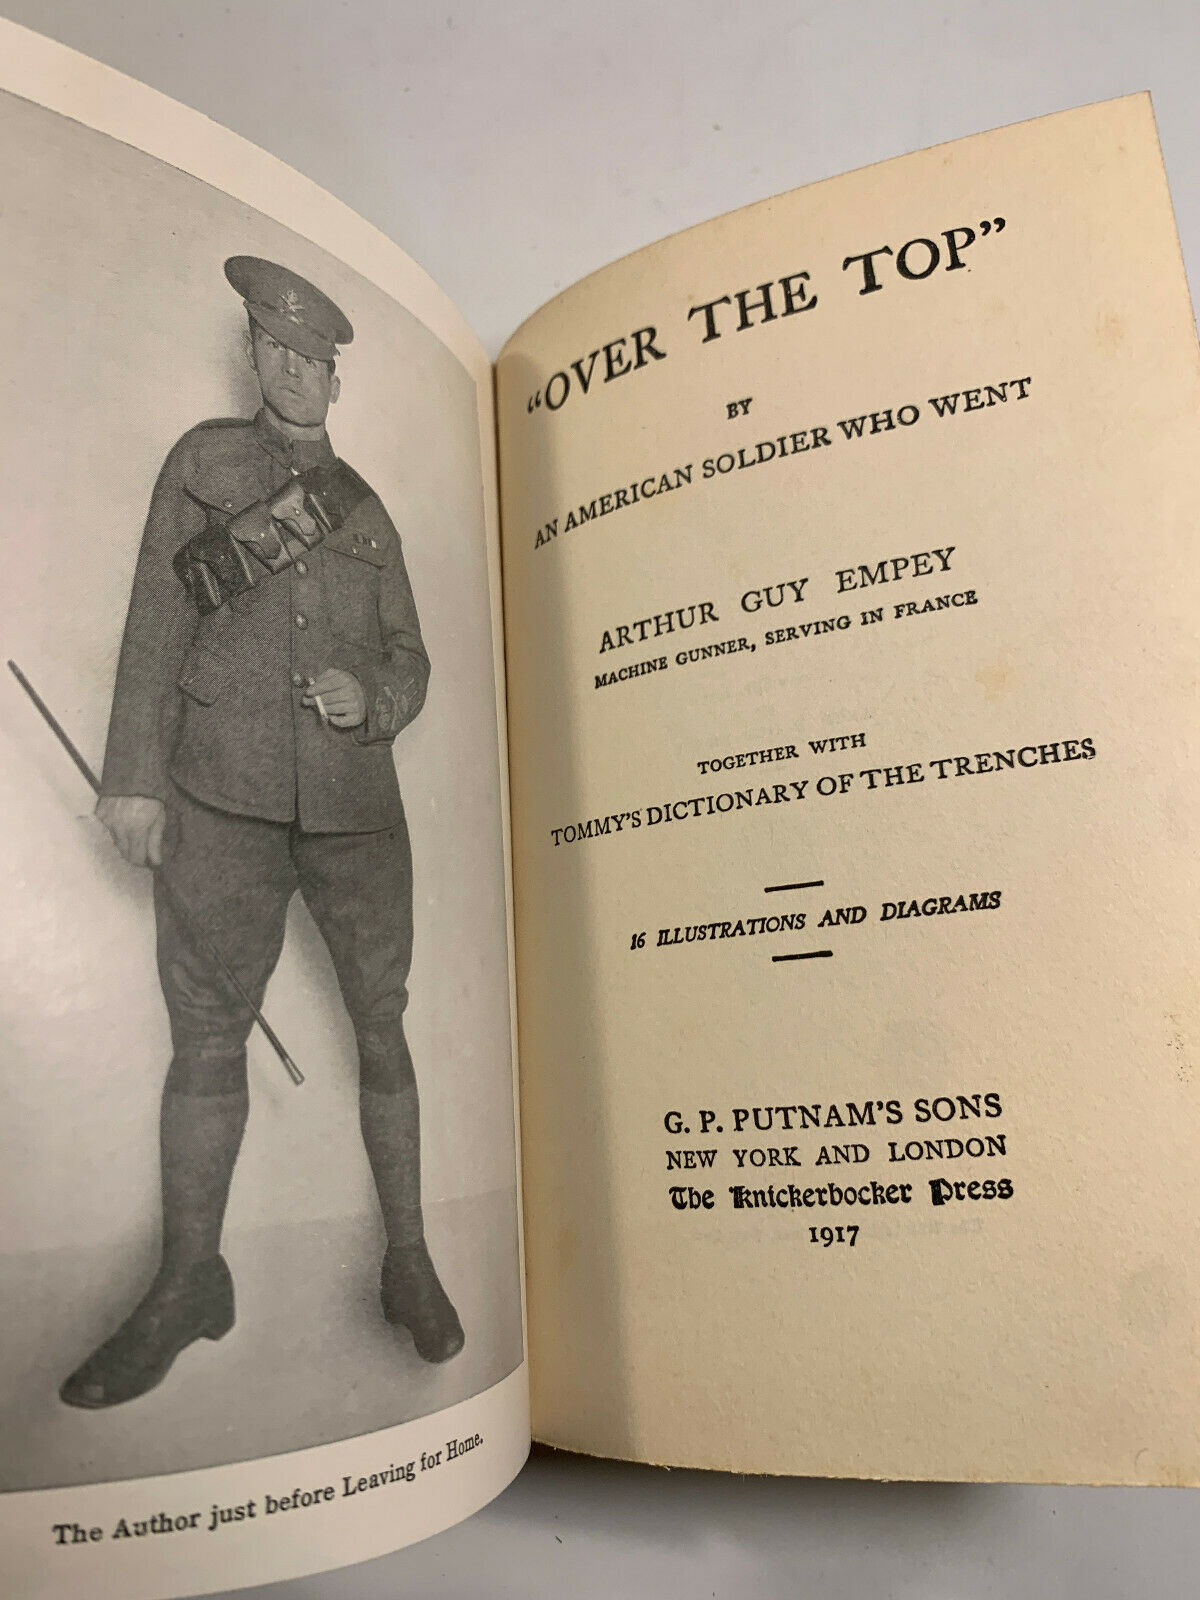 Over The Top: An American Soilder Who Went by Arthur Guy Empey